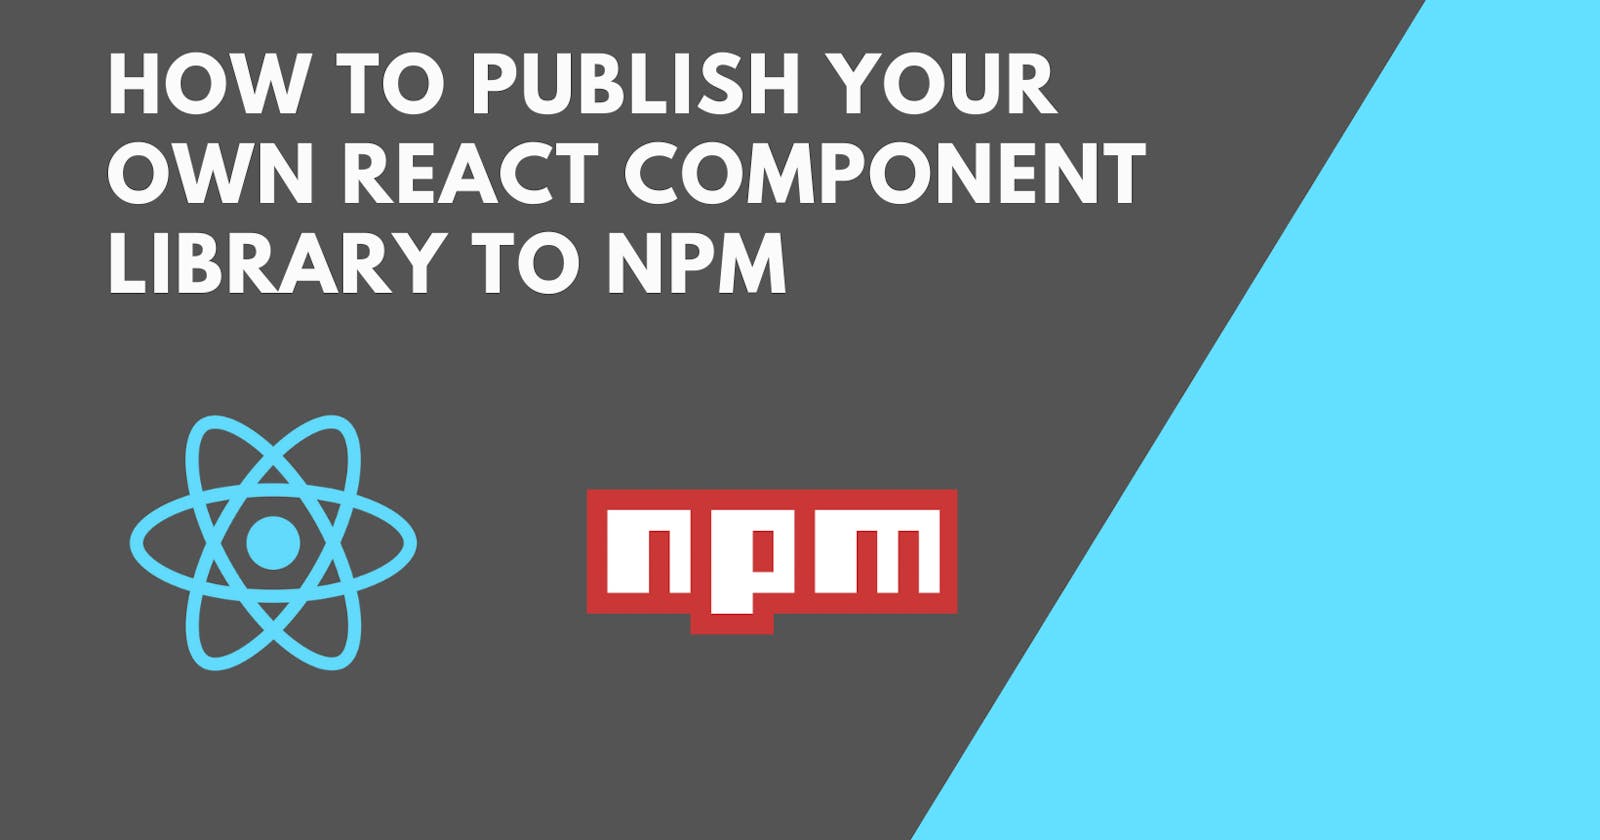 How to publish your own React component library to npm